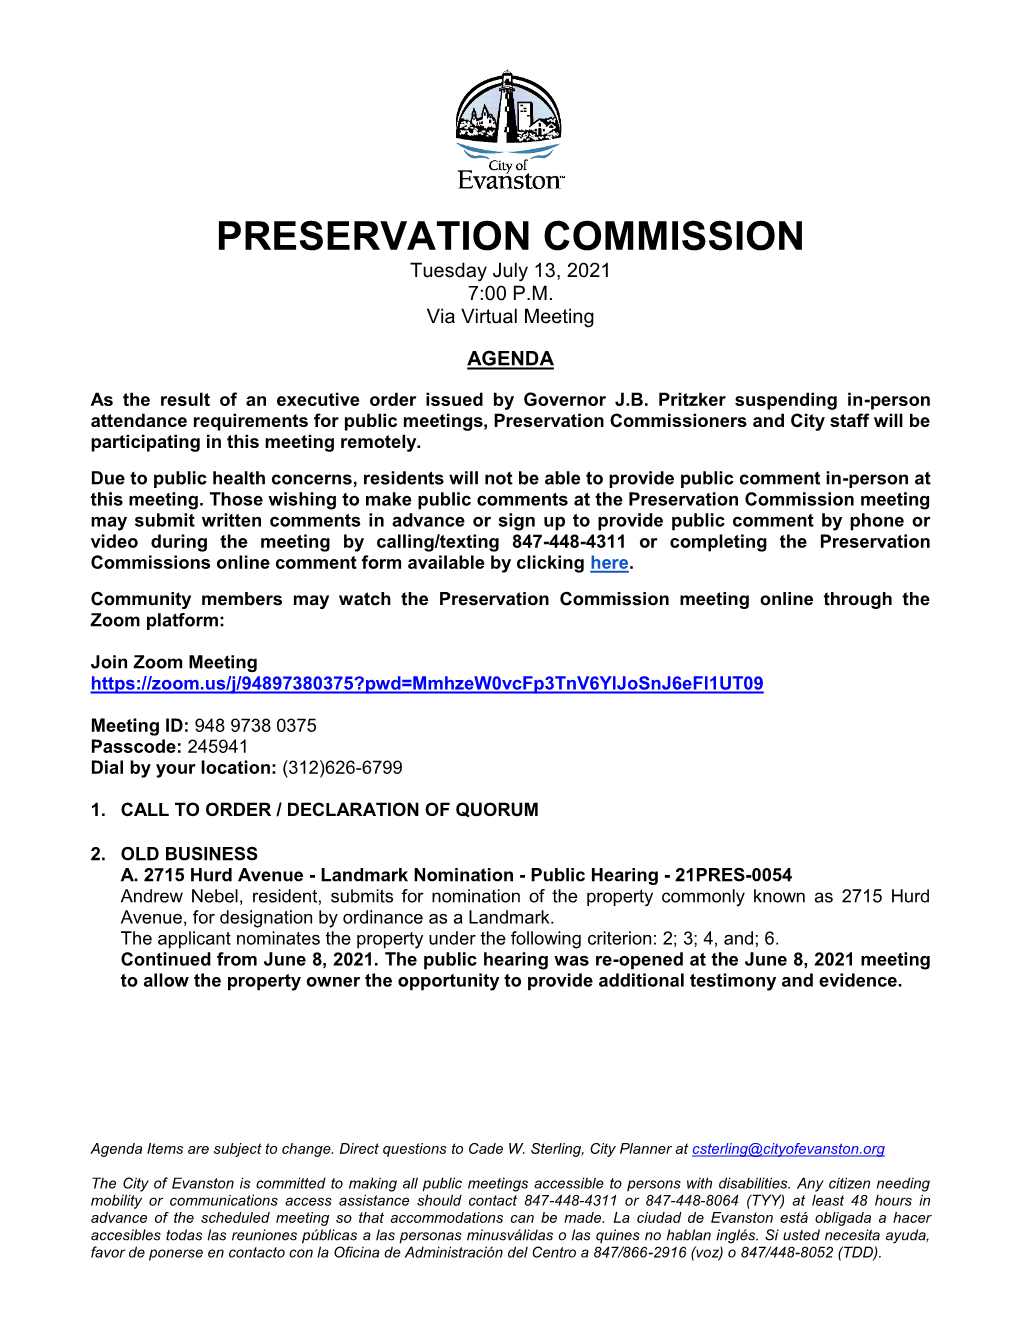 PRESERVATION COMMISSION Tuesday July 13, 2021 7:00 P.M